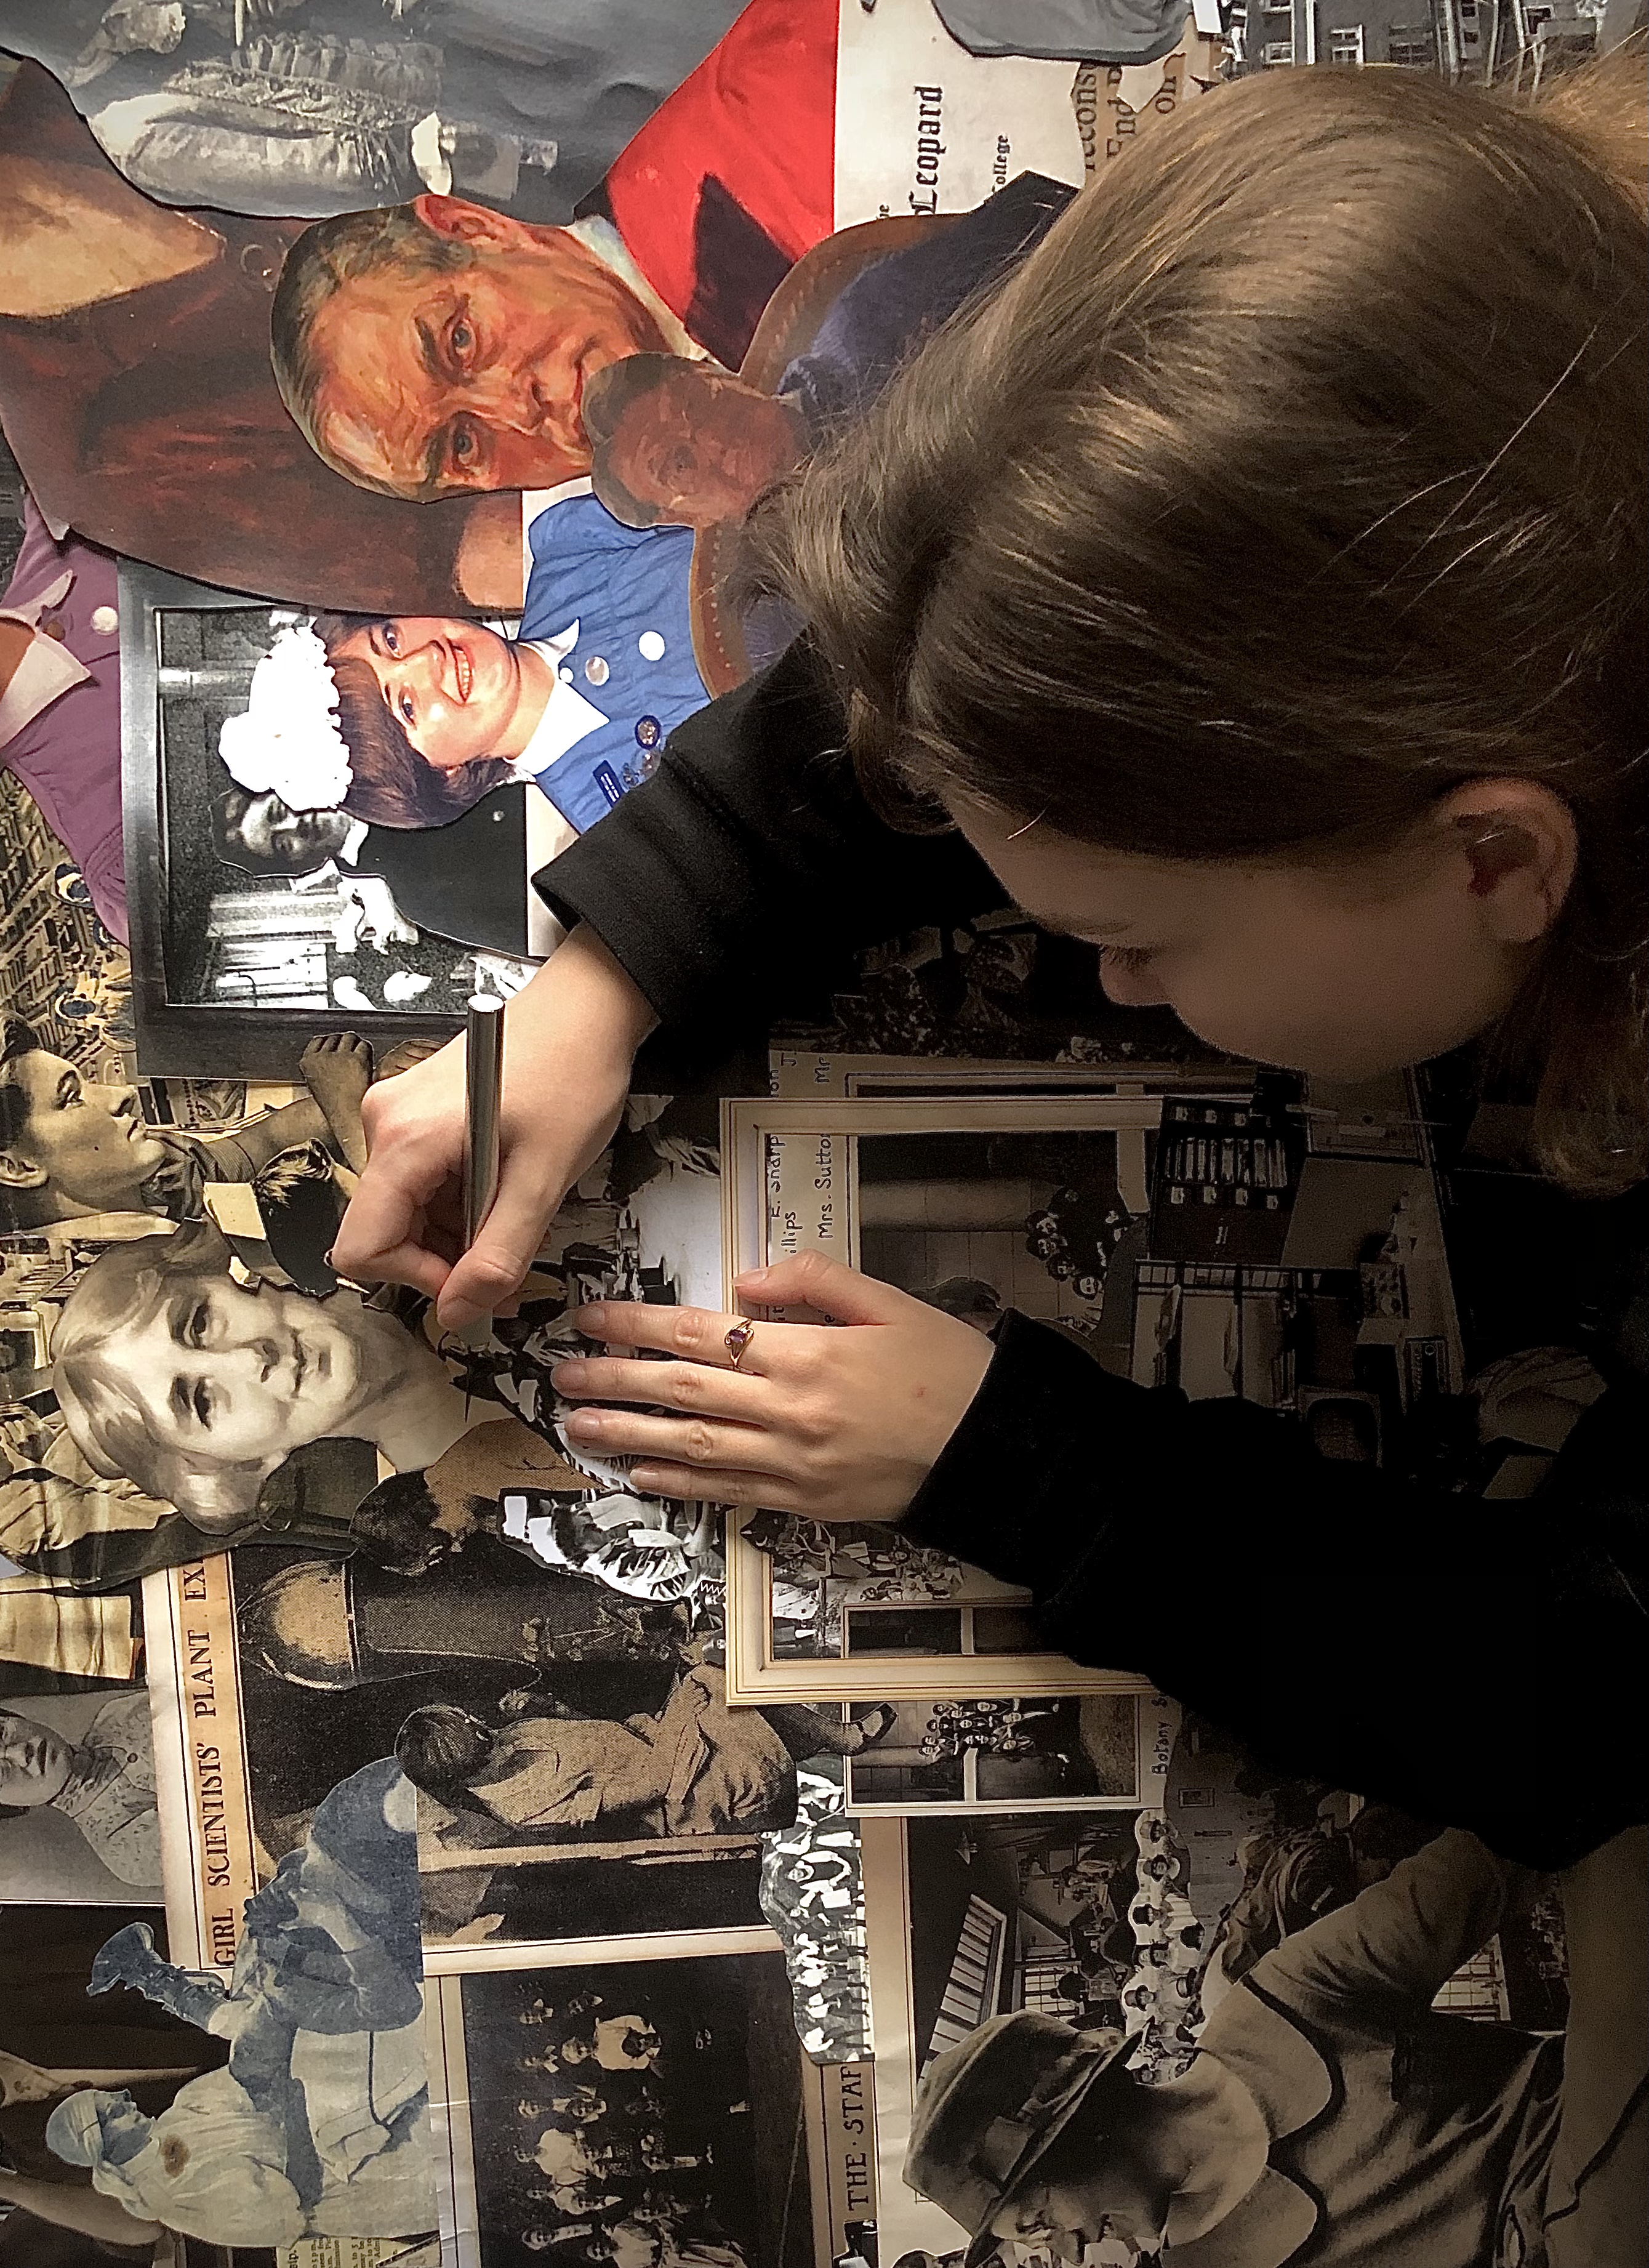 A girl working on an art collage.